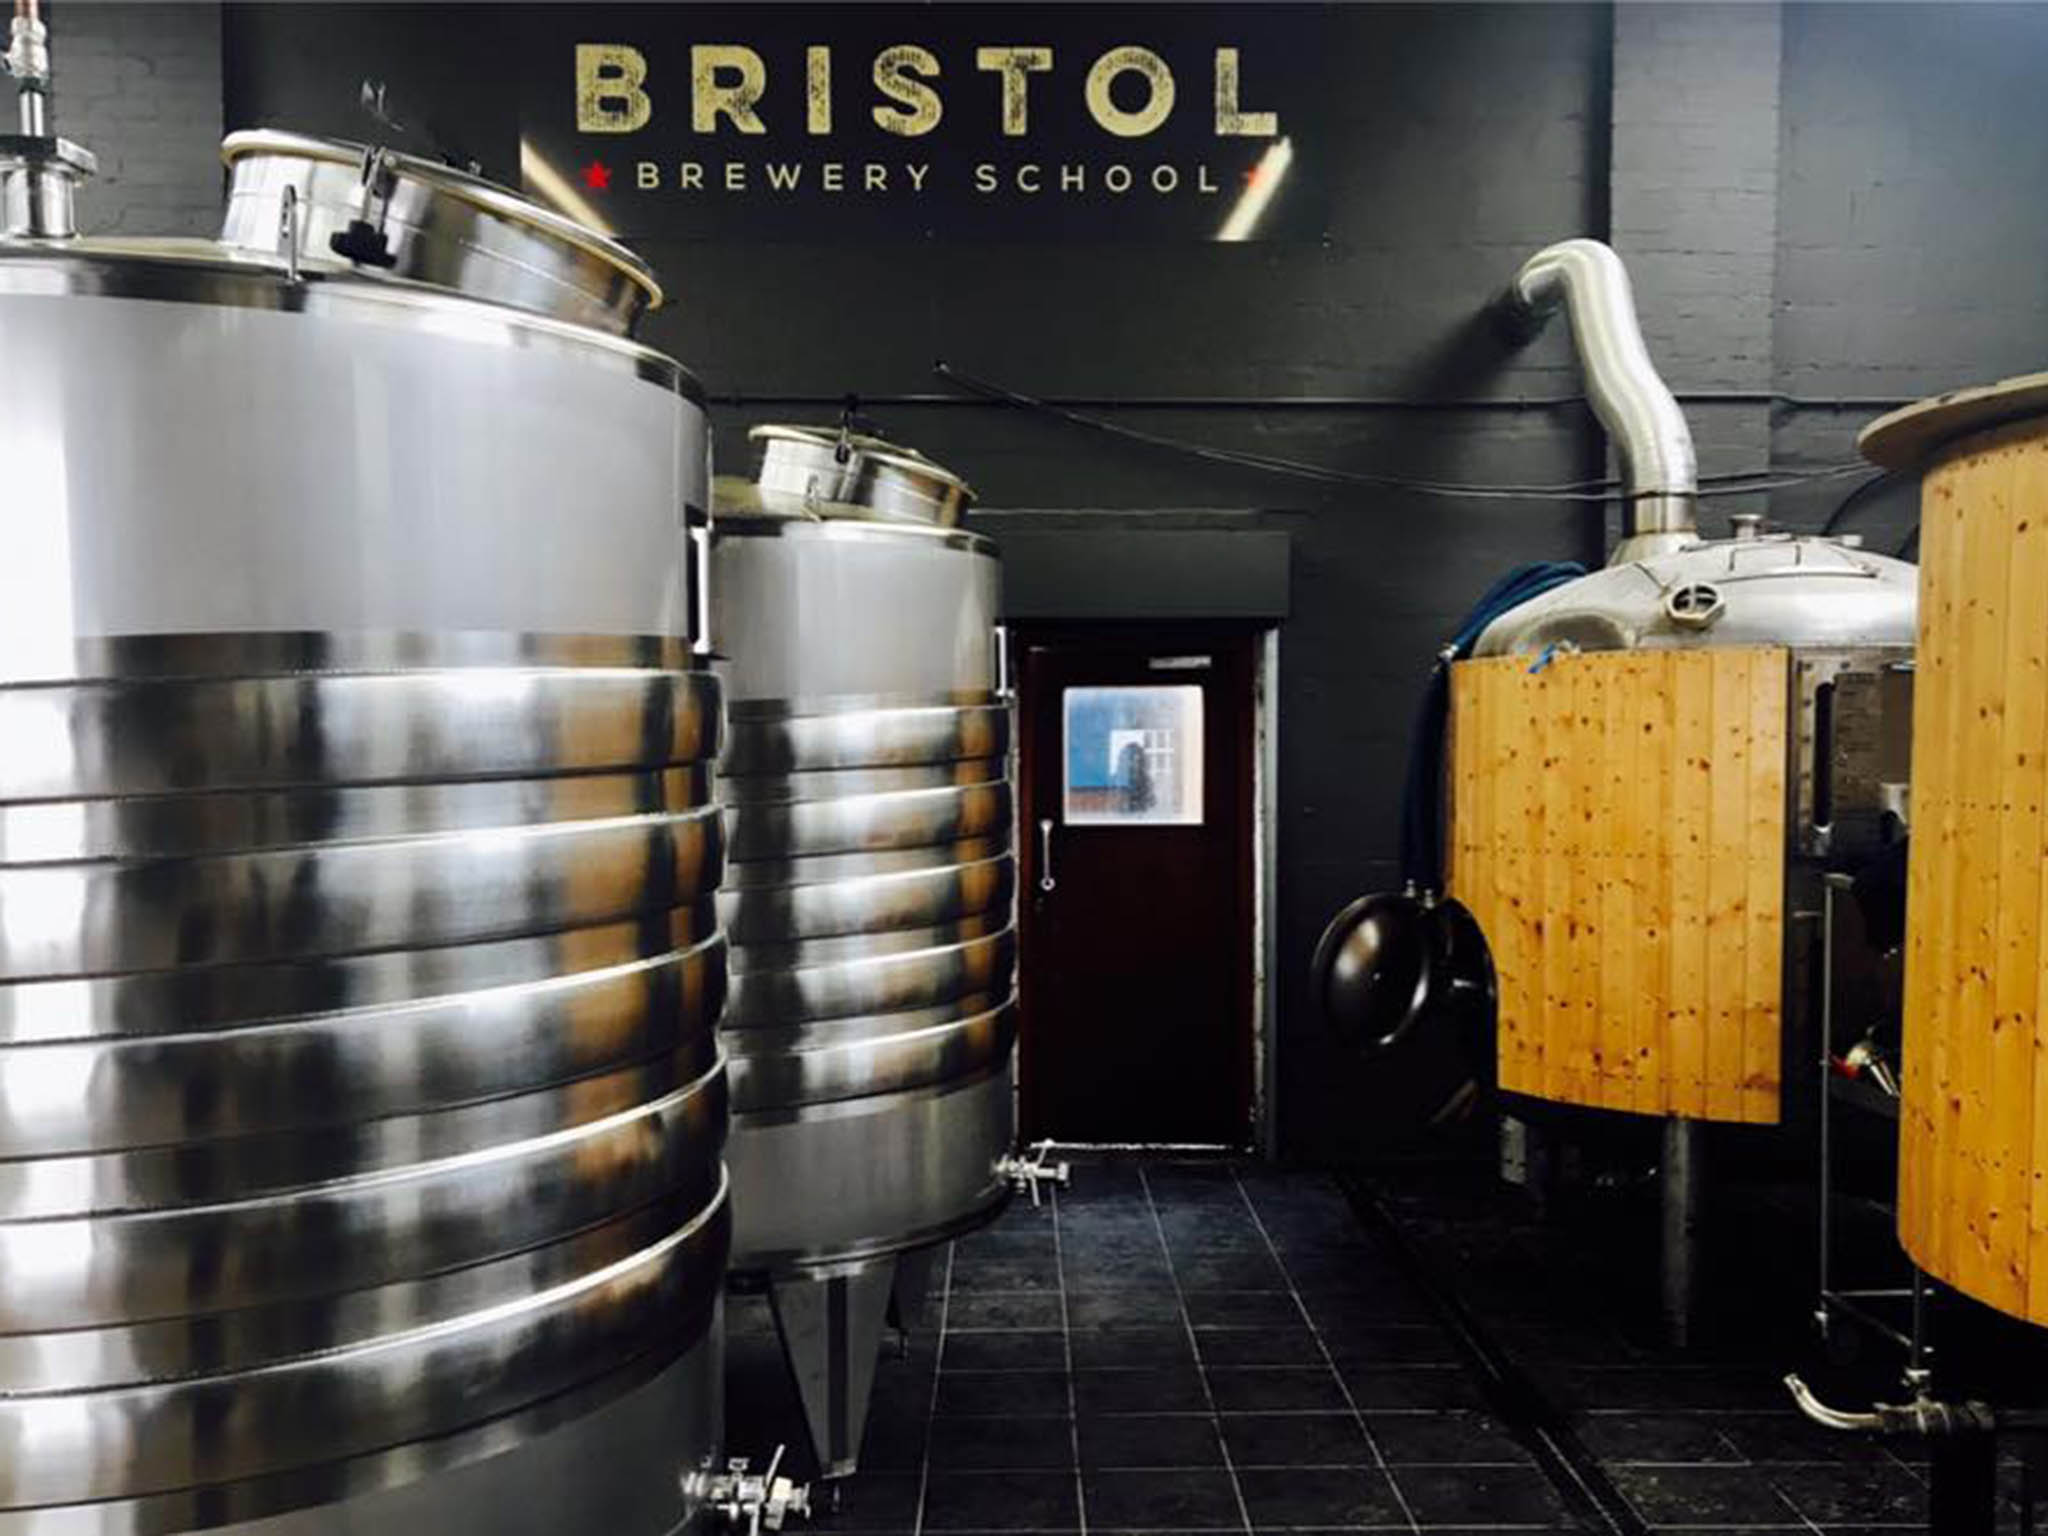 Some of the brewing equipment on site: fermeters (left), mash tun (front right) and brew kettle, where the freshly made ‘wort’ is boiled